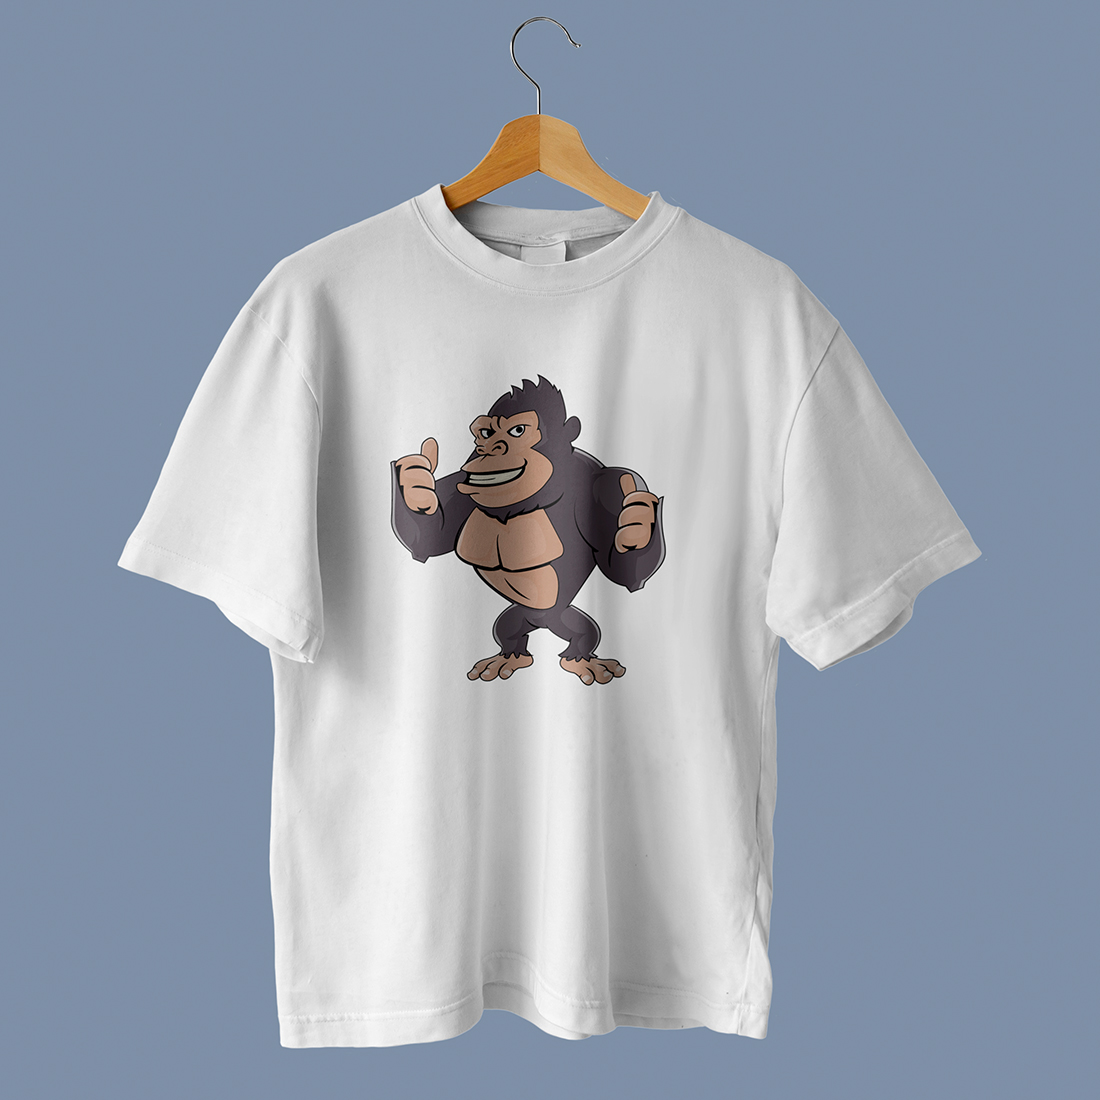 Animal T-shirt Collections monkey.